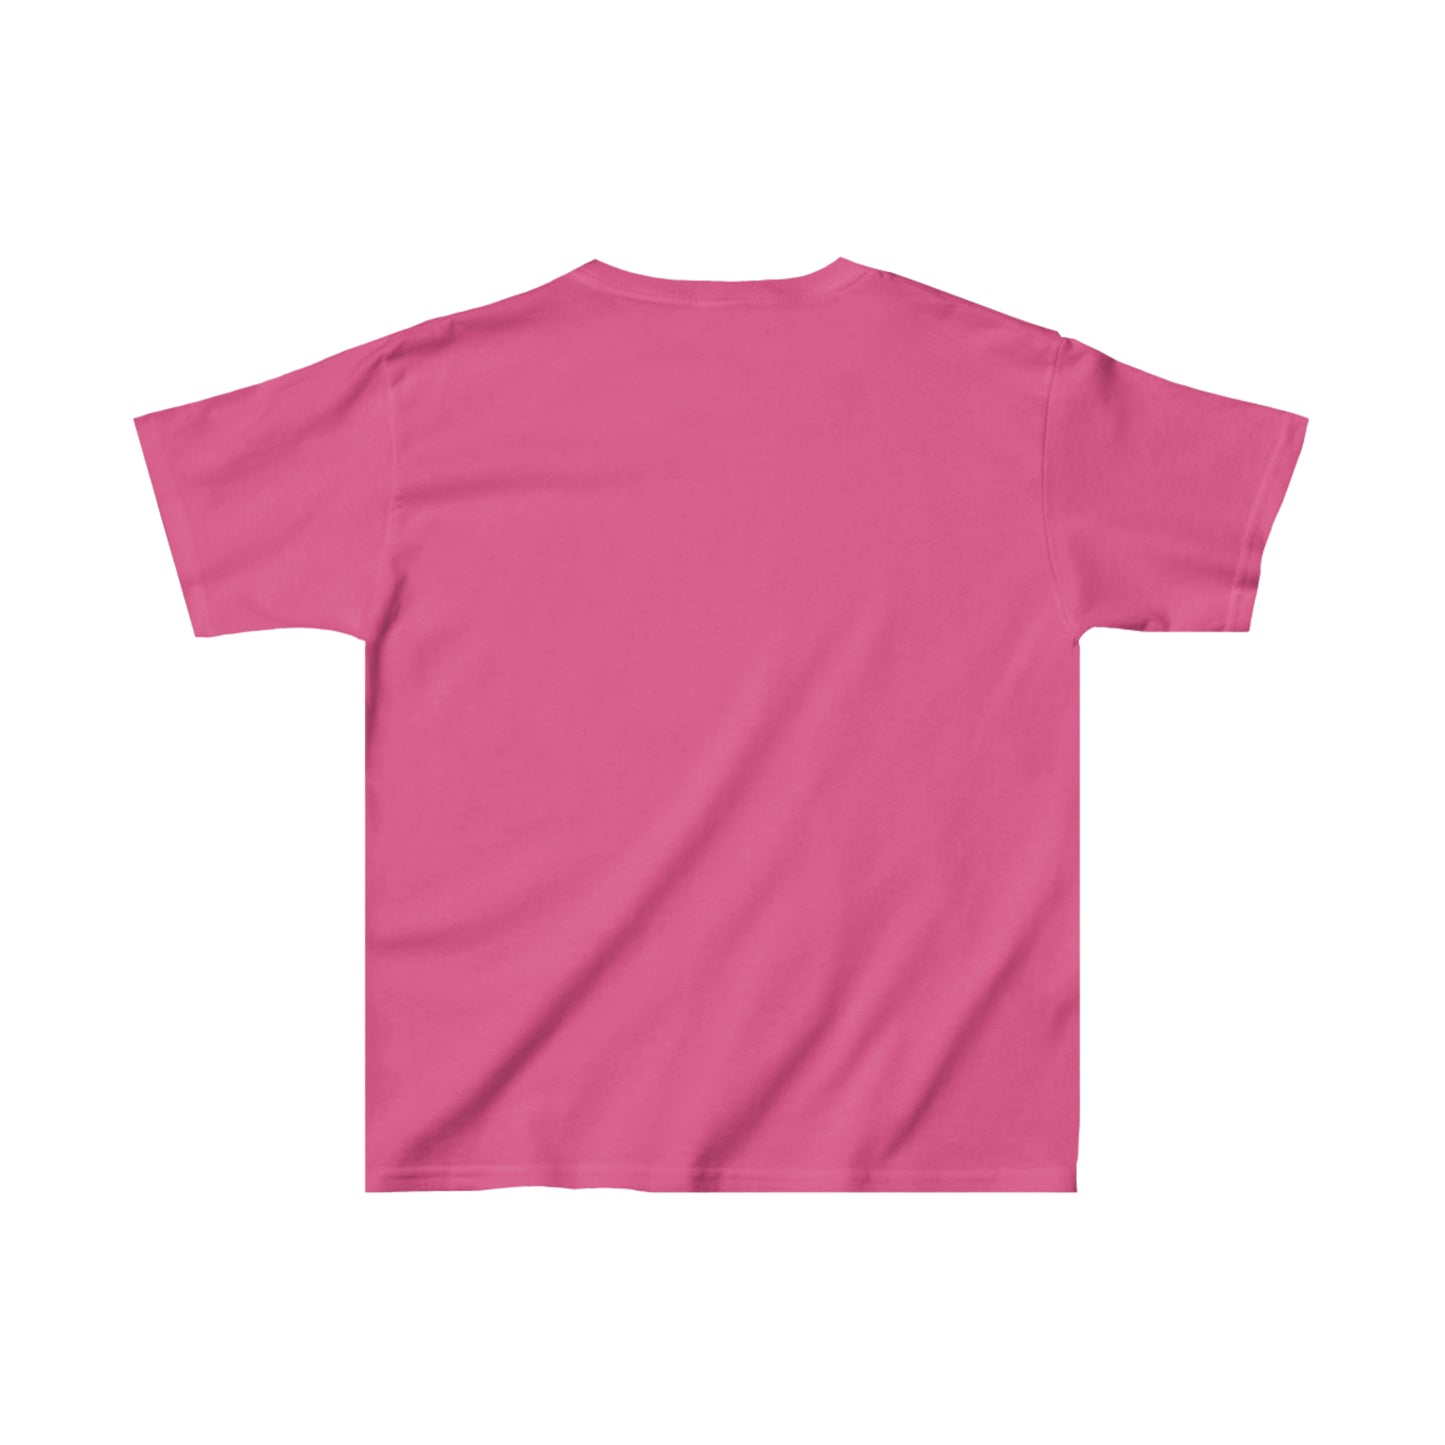 Warning - My Mom's Job Involves A Lot of Behind-the-Scenes Action, Kids Heavy Cotton Tee